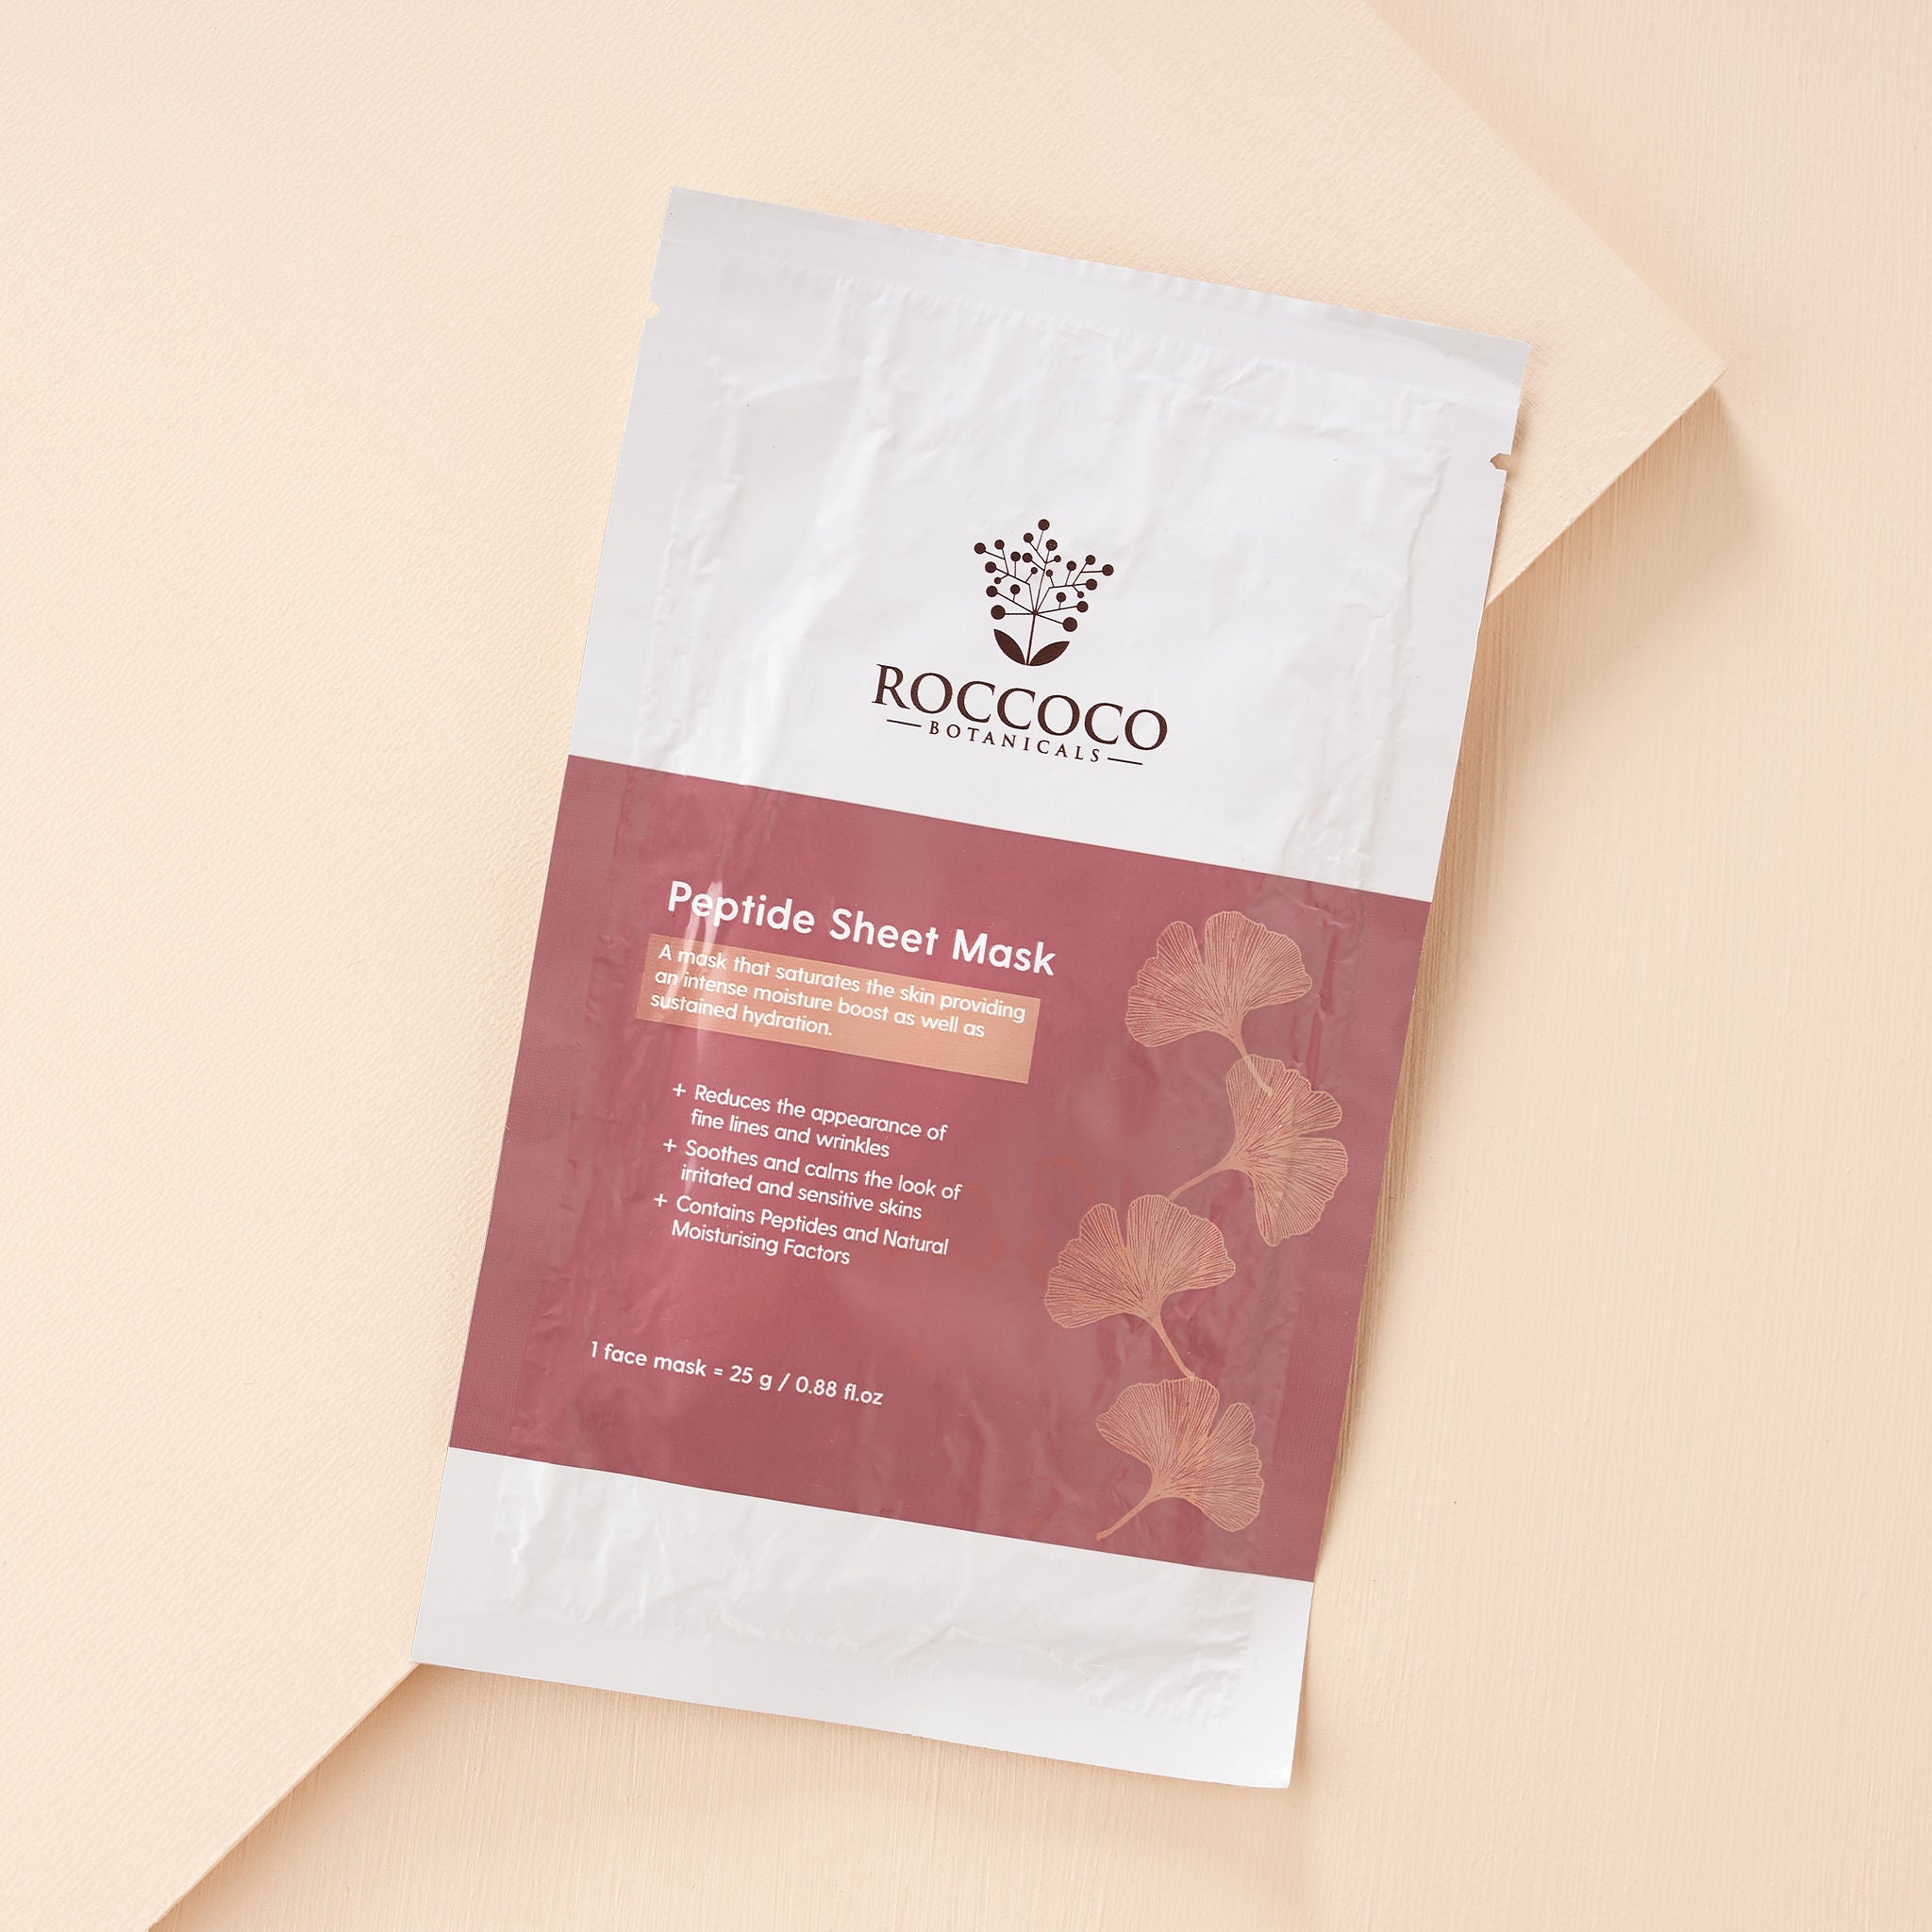 Roccoco Botanicals Peptide Sheet Mask - Click to Buy!